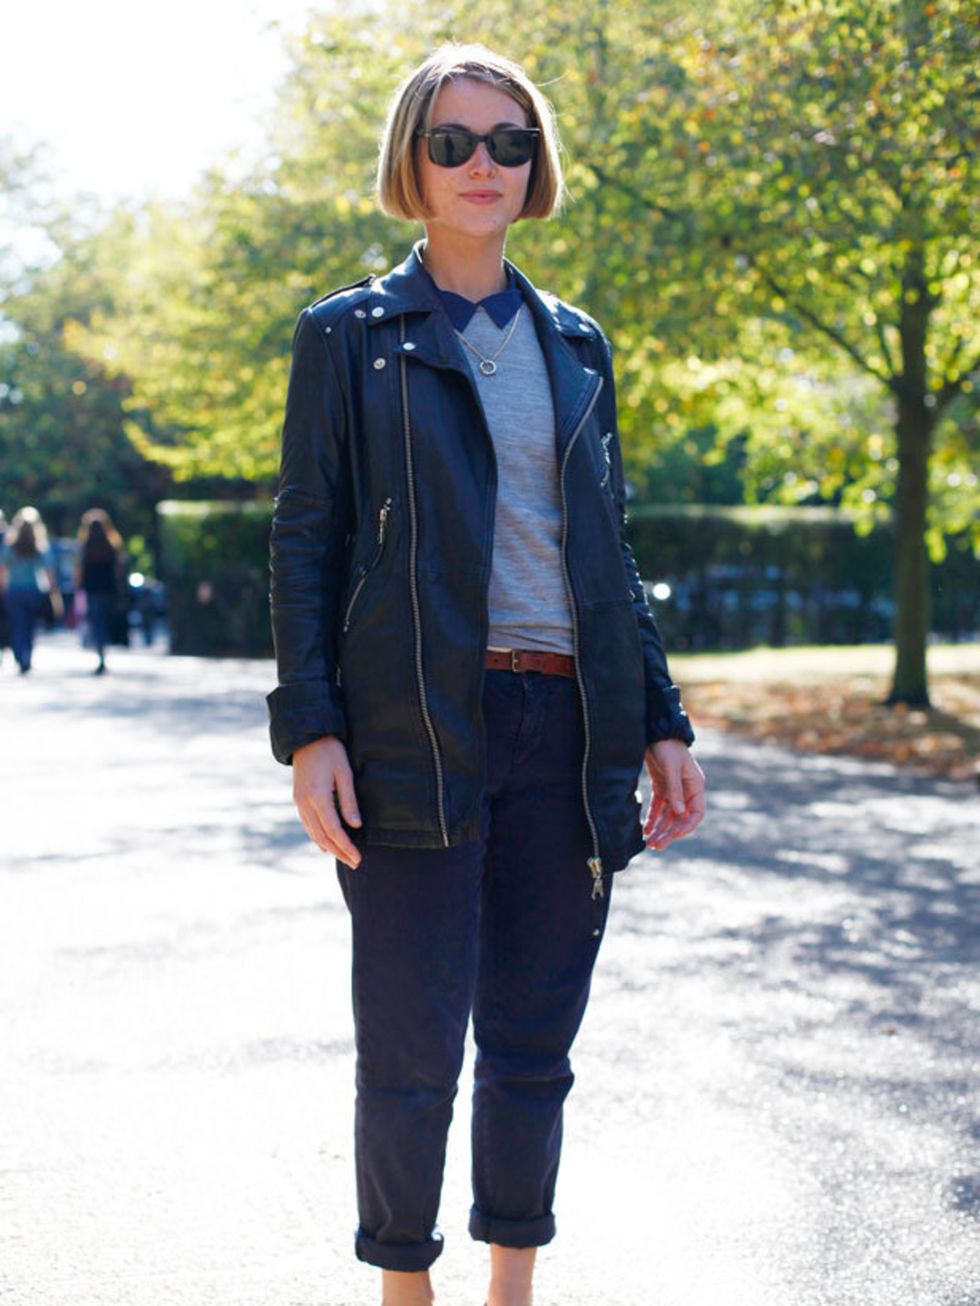 <p>Photo by Silvia Olsen @ Anthea SimmsNicky Smith, 27, Writer, Whistles jacket, Uniqlo jumper, Needle &amp; Pin shirt, Carhart trousers, Russell &amp; Bromley brogues, Alex Monroe necklace, Ray Ban sunglasses.</p>